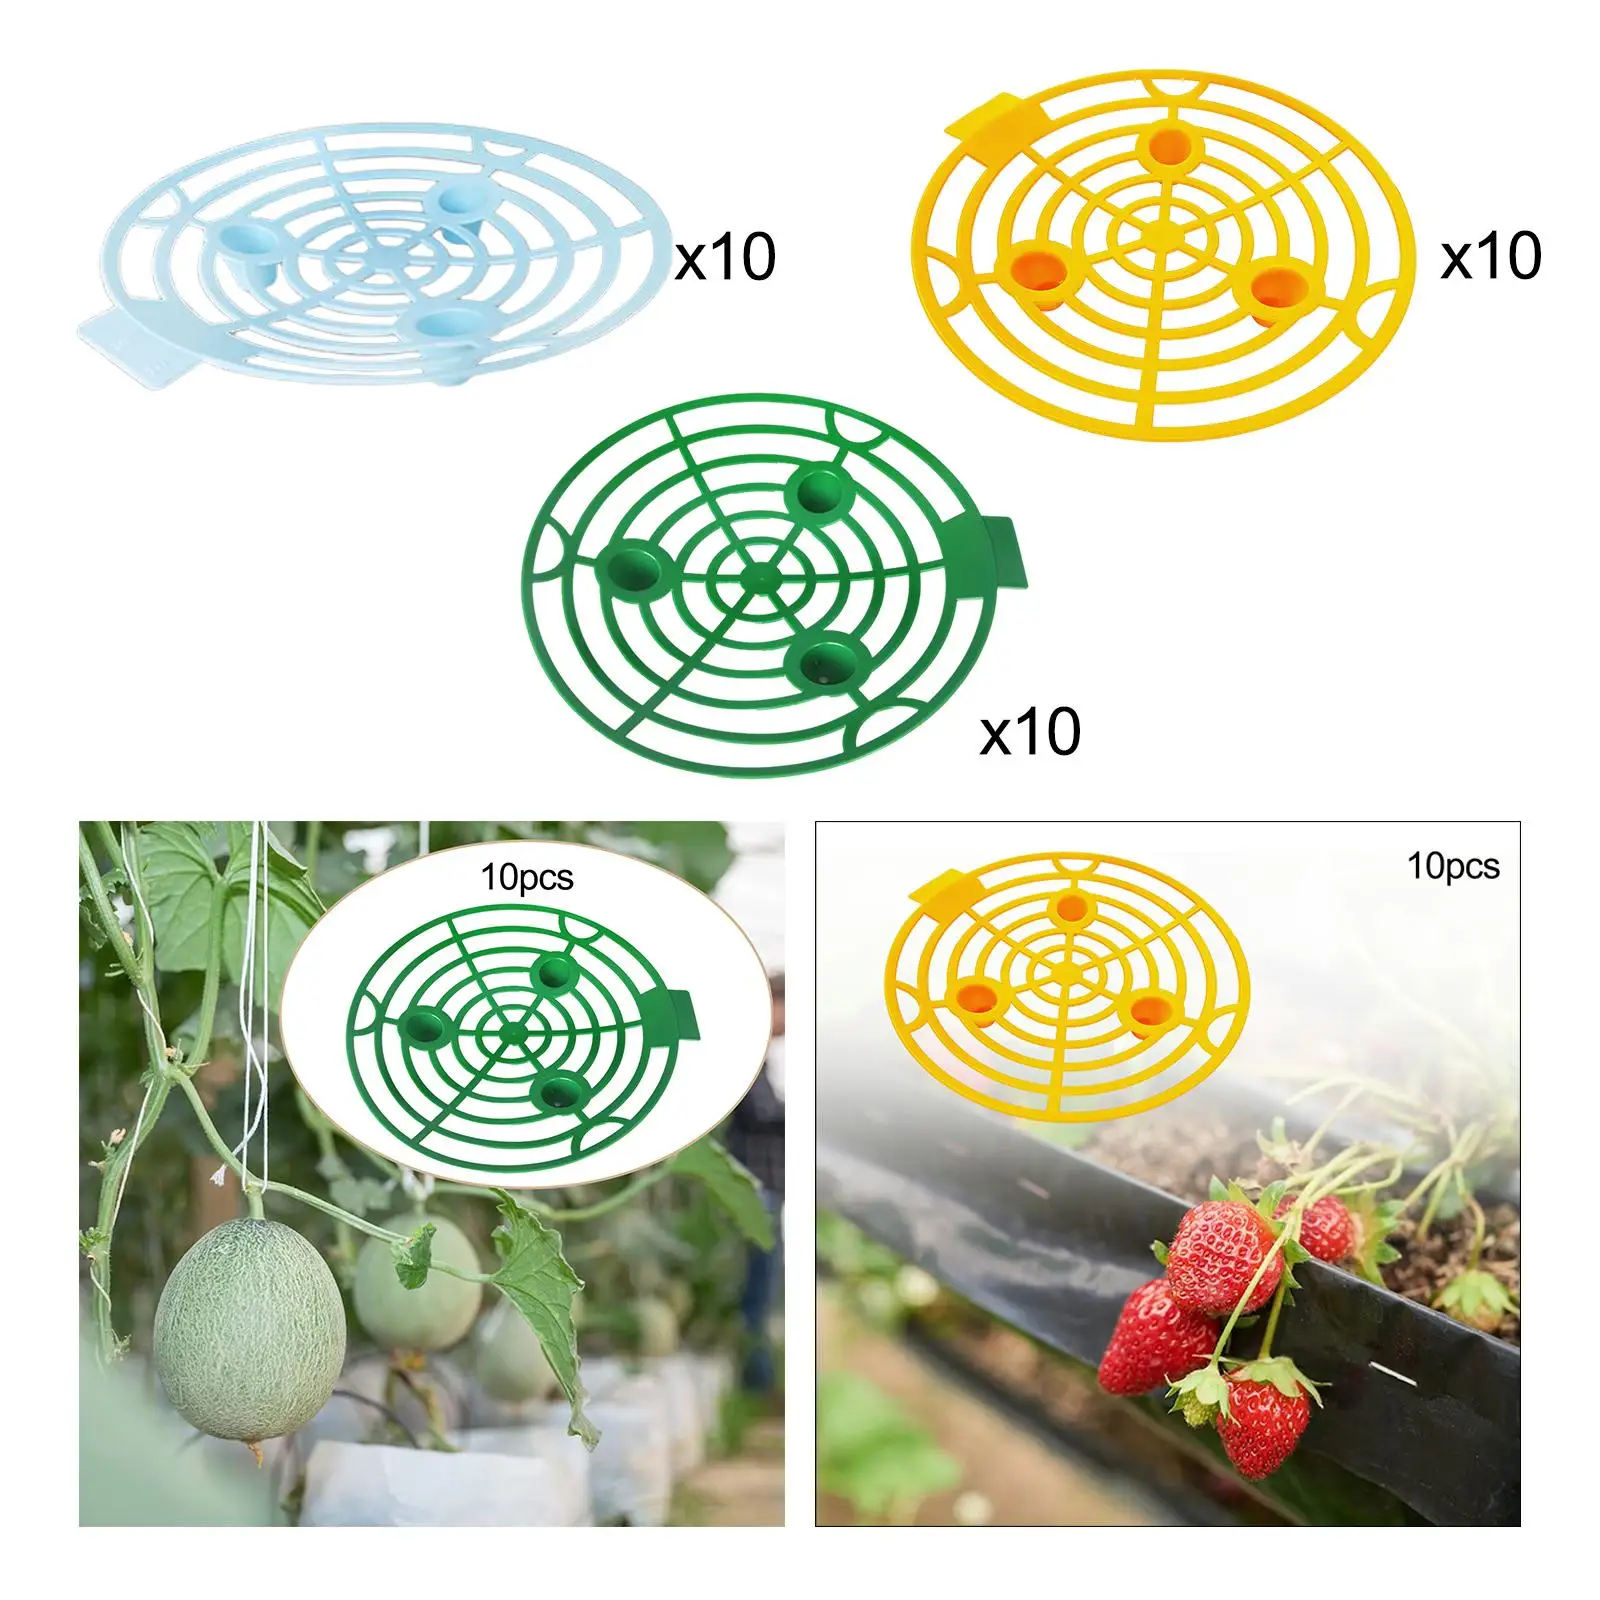 10 Pieces Protector Watermelon Cradle for Cantaloupe Squash Gardening Supply